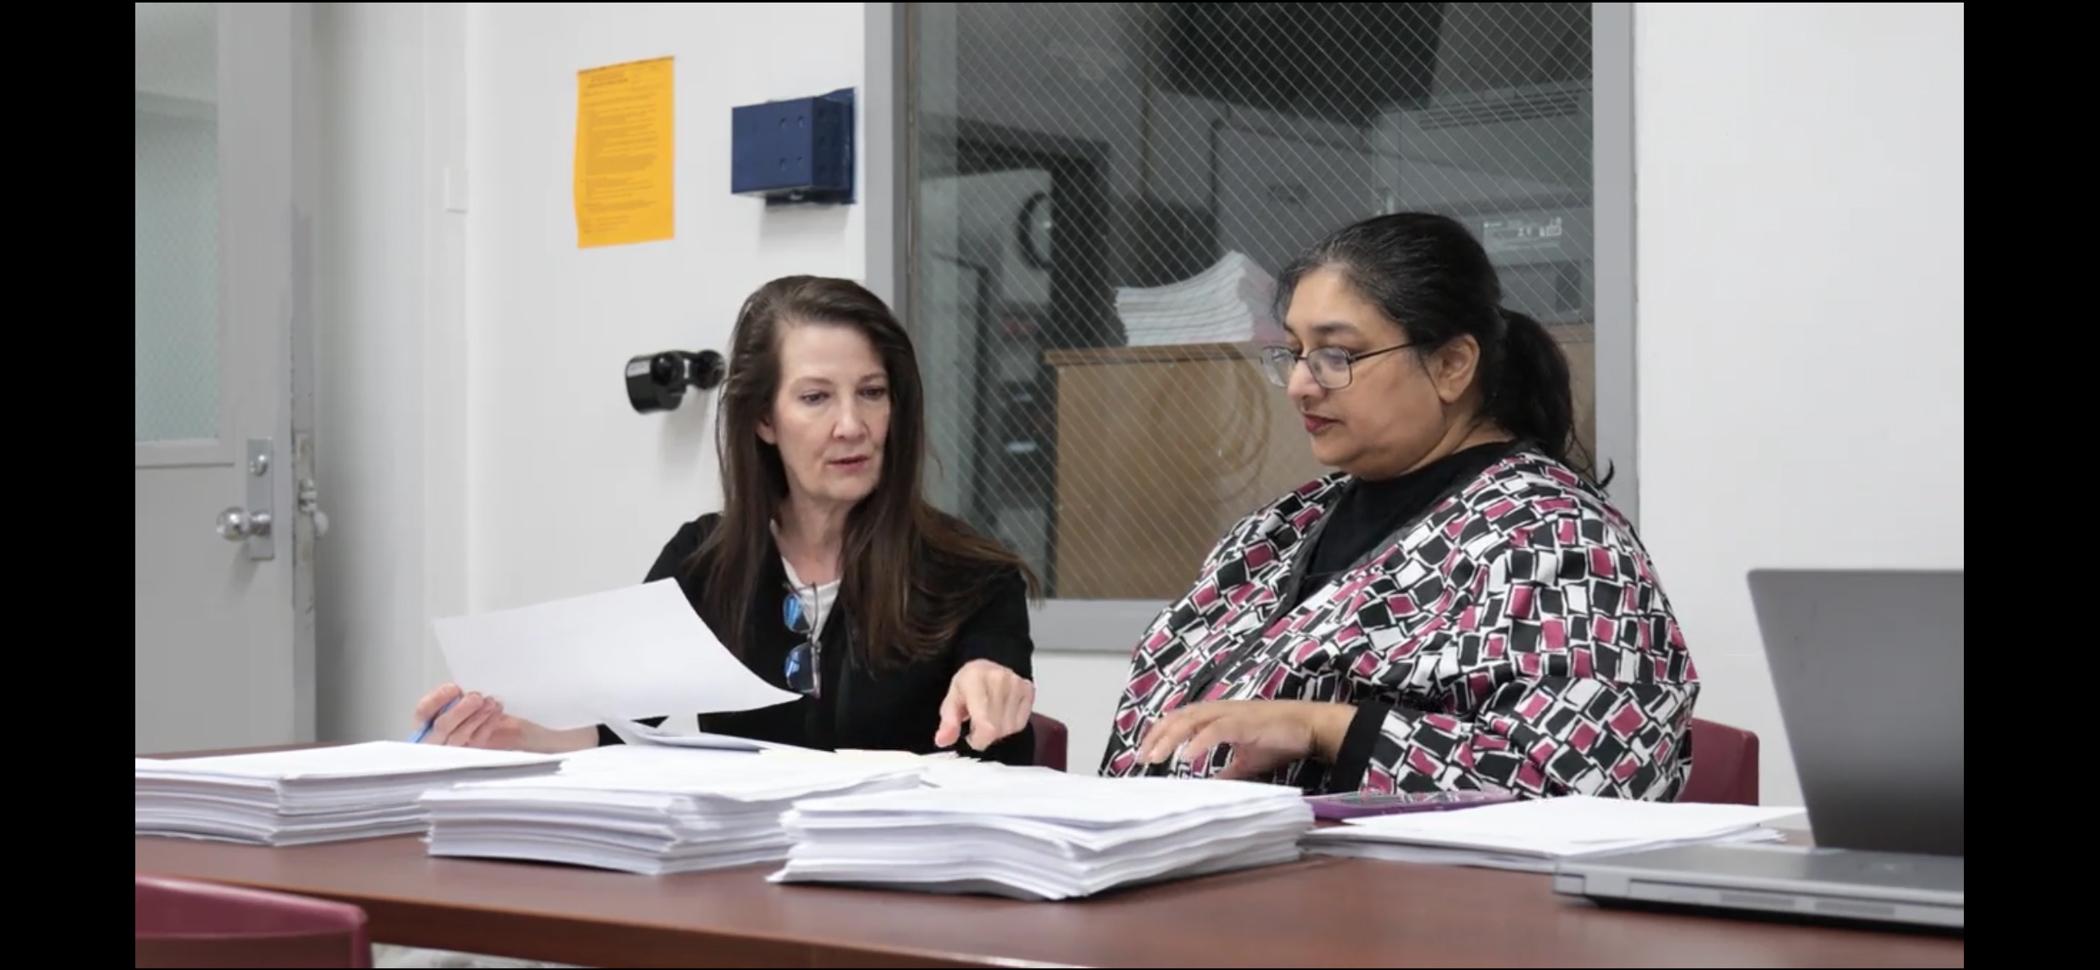 Woman assists female colleague with legal support for returning citizen clinic participant files.